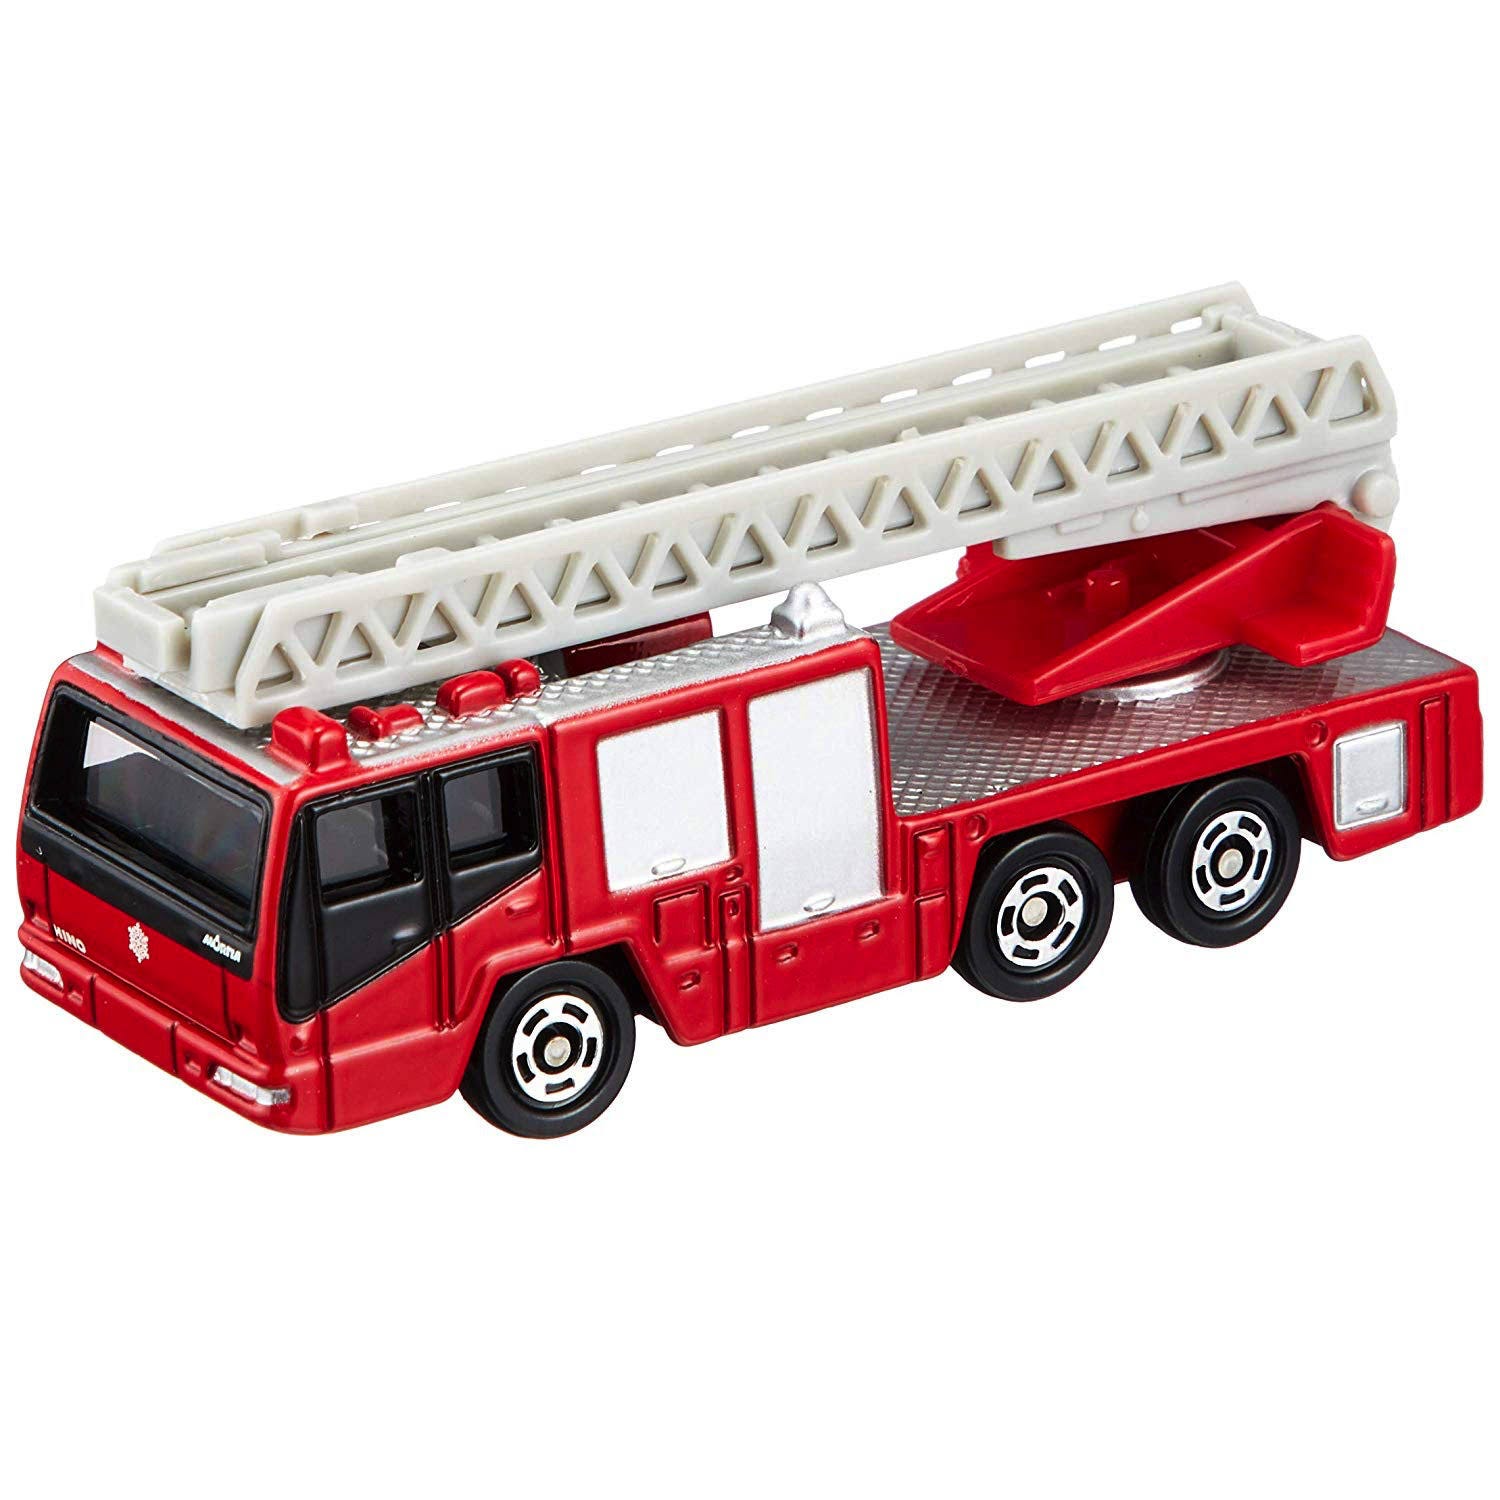 Realistic Mini Aerial Ladder Fire Truck Toy by Tomica | Image